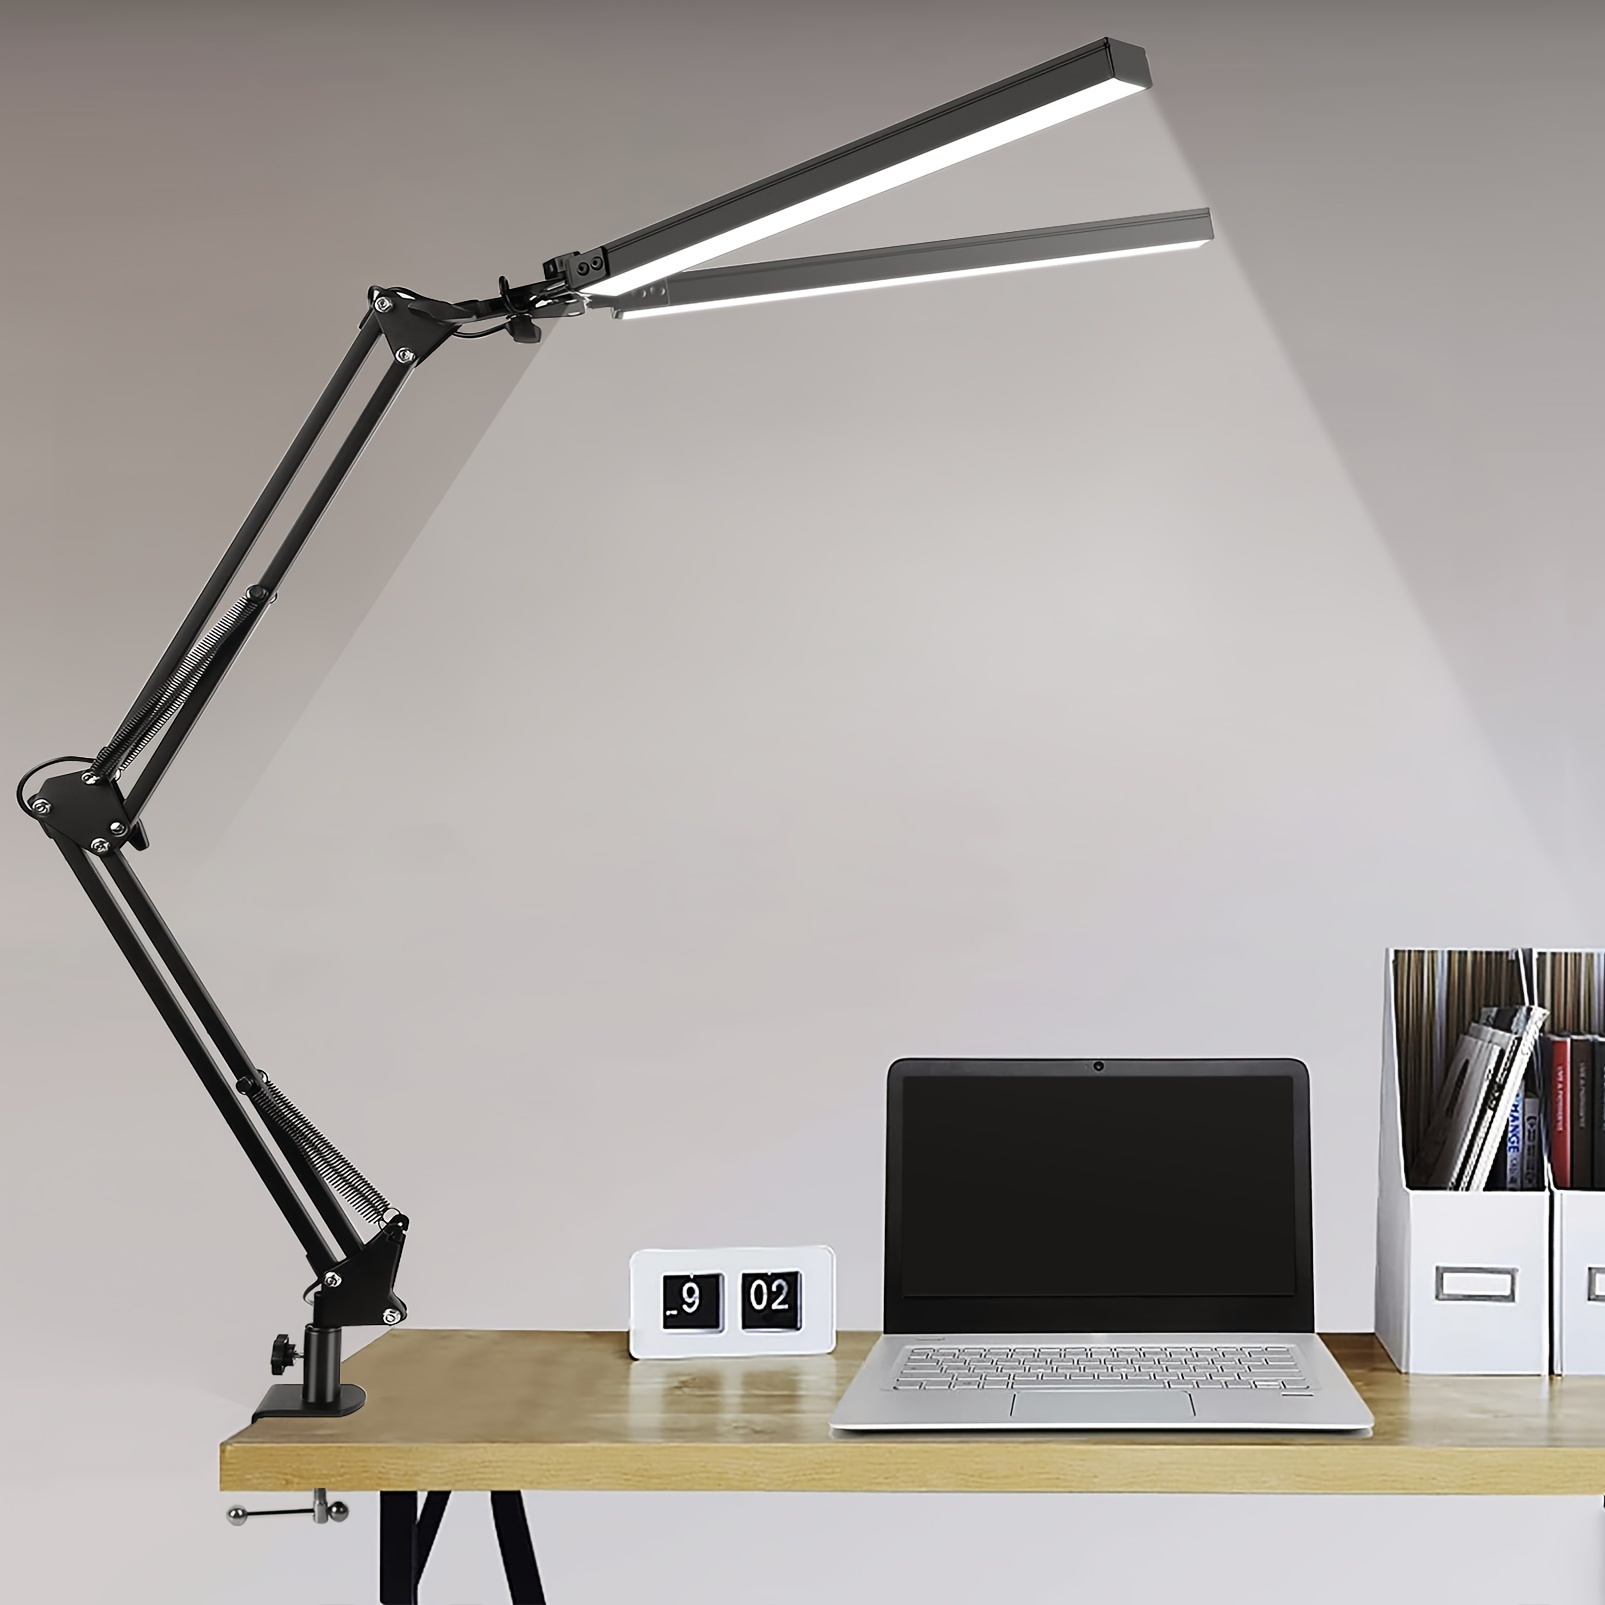 2-in-1 Desk Lamp, Desk Light With Flexible Arm,3 Color Modes Dimmable Double  Head Desk Lamps For Home Office Workbench Reading 